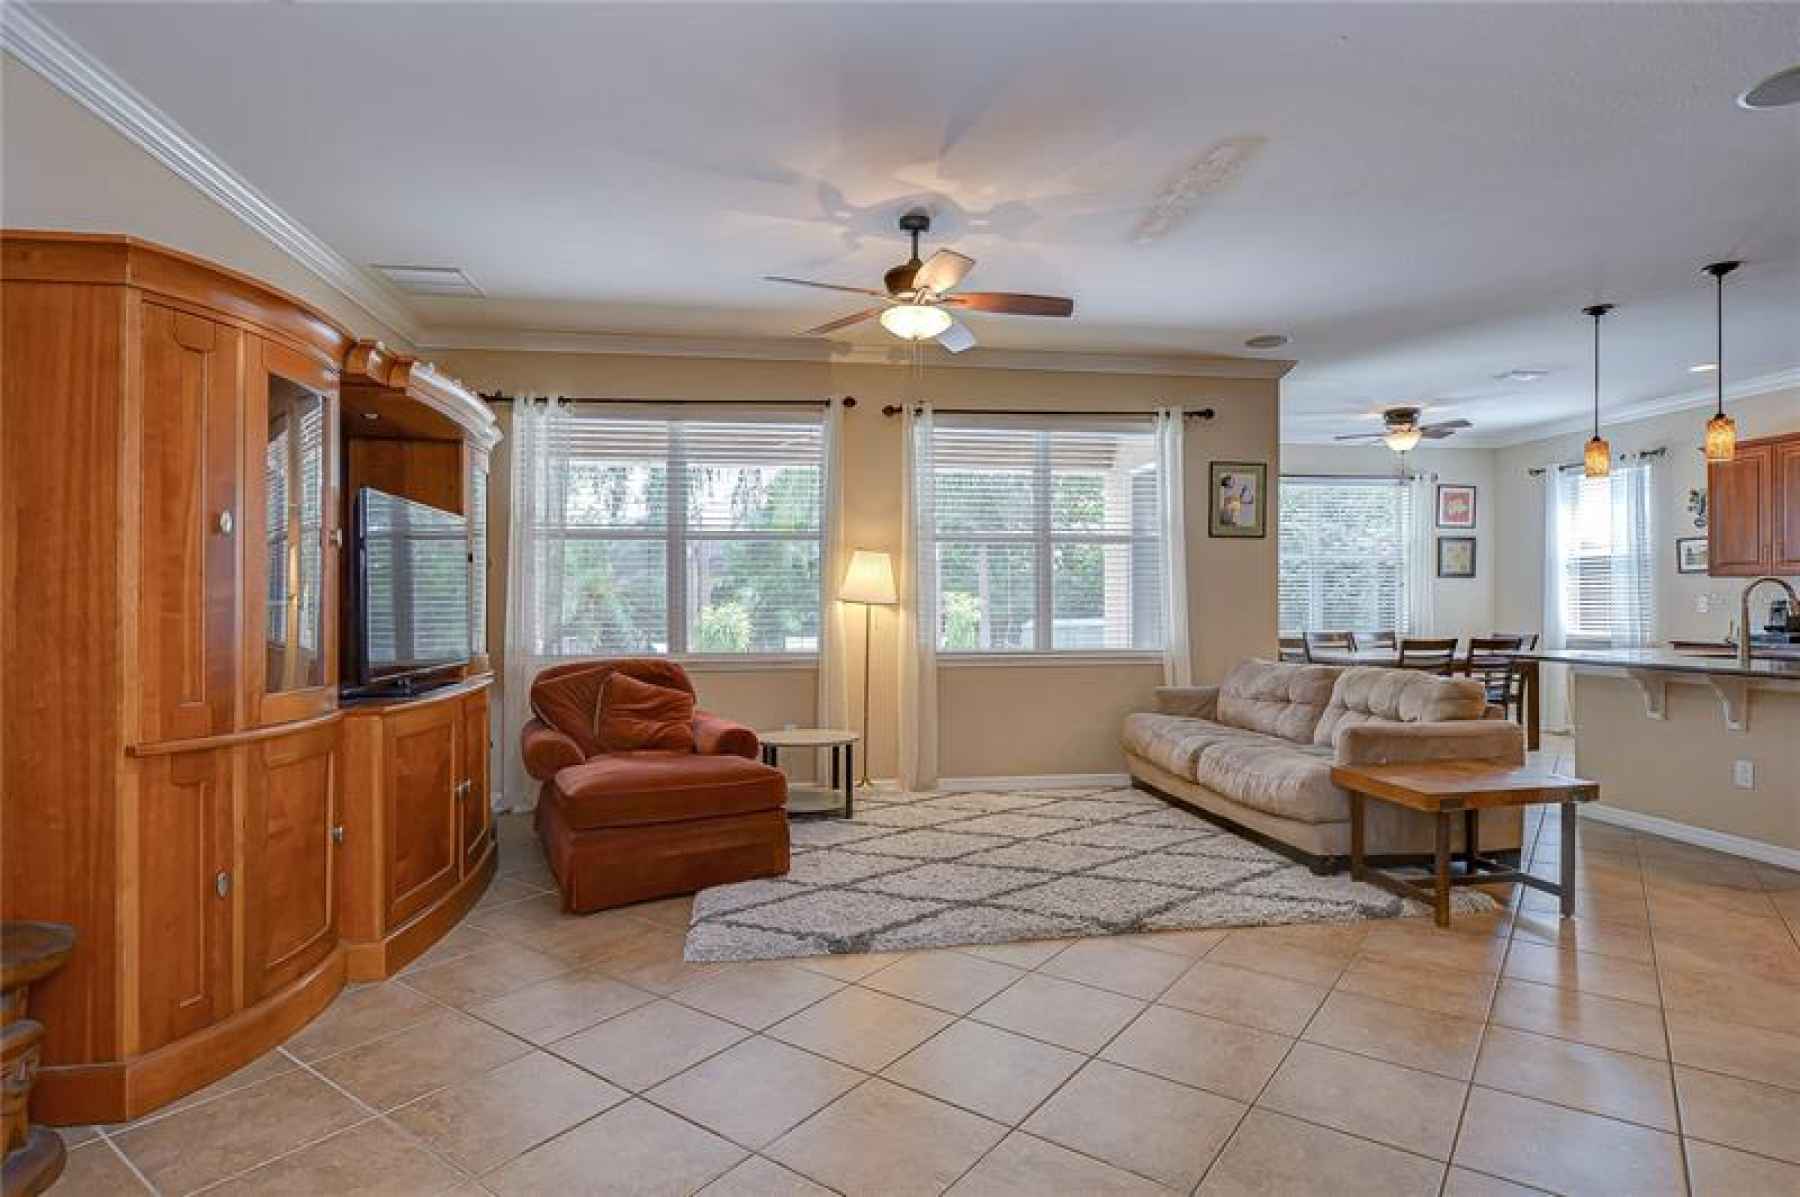 This home was built for entertaining with a large great room and kitchen combination!